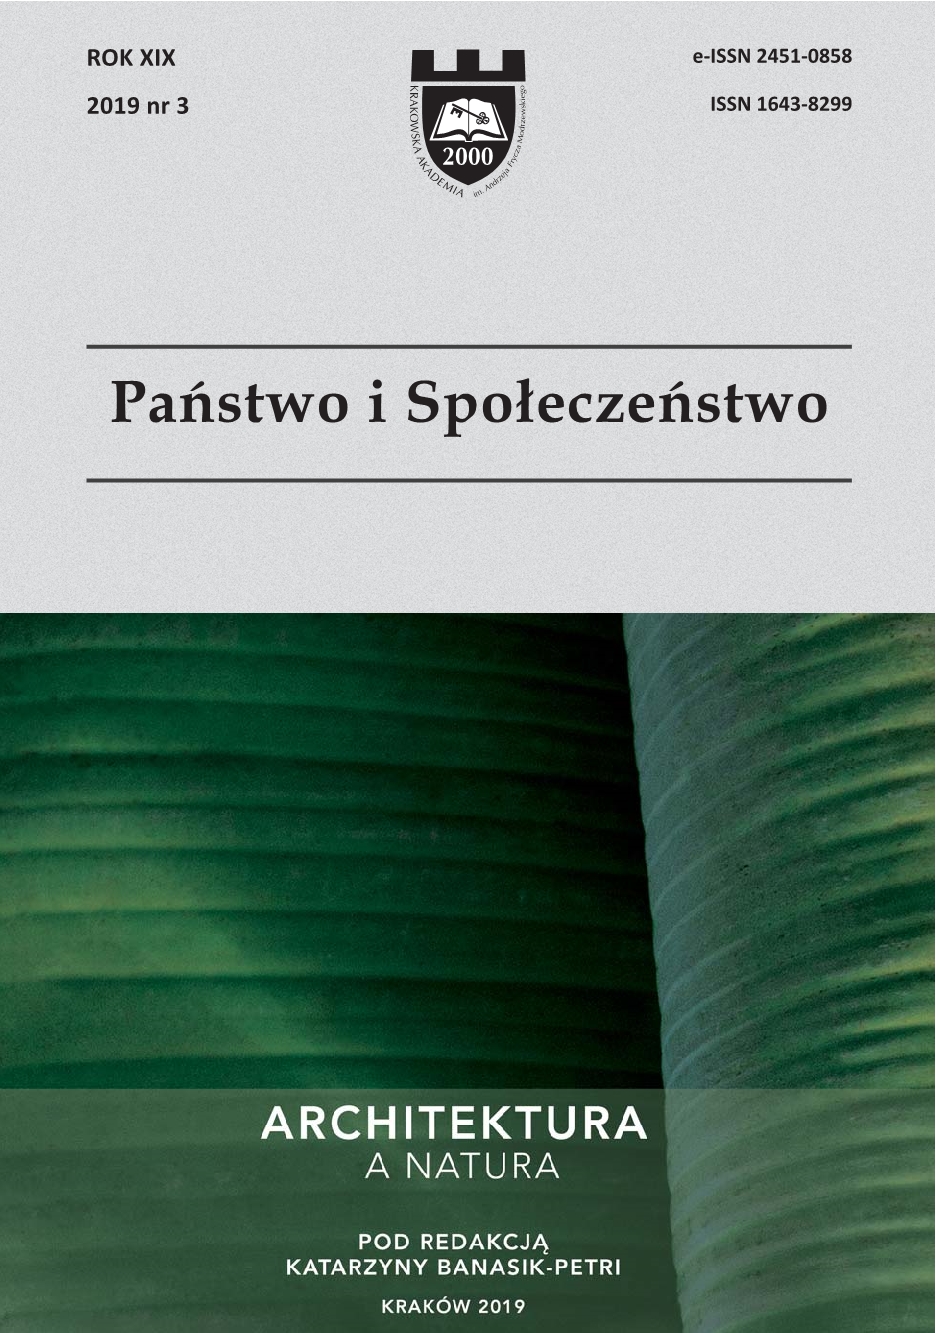 Summer School of Architecture students - a study journey along the trail of Polish architecture Cover Image